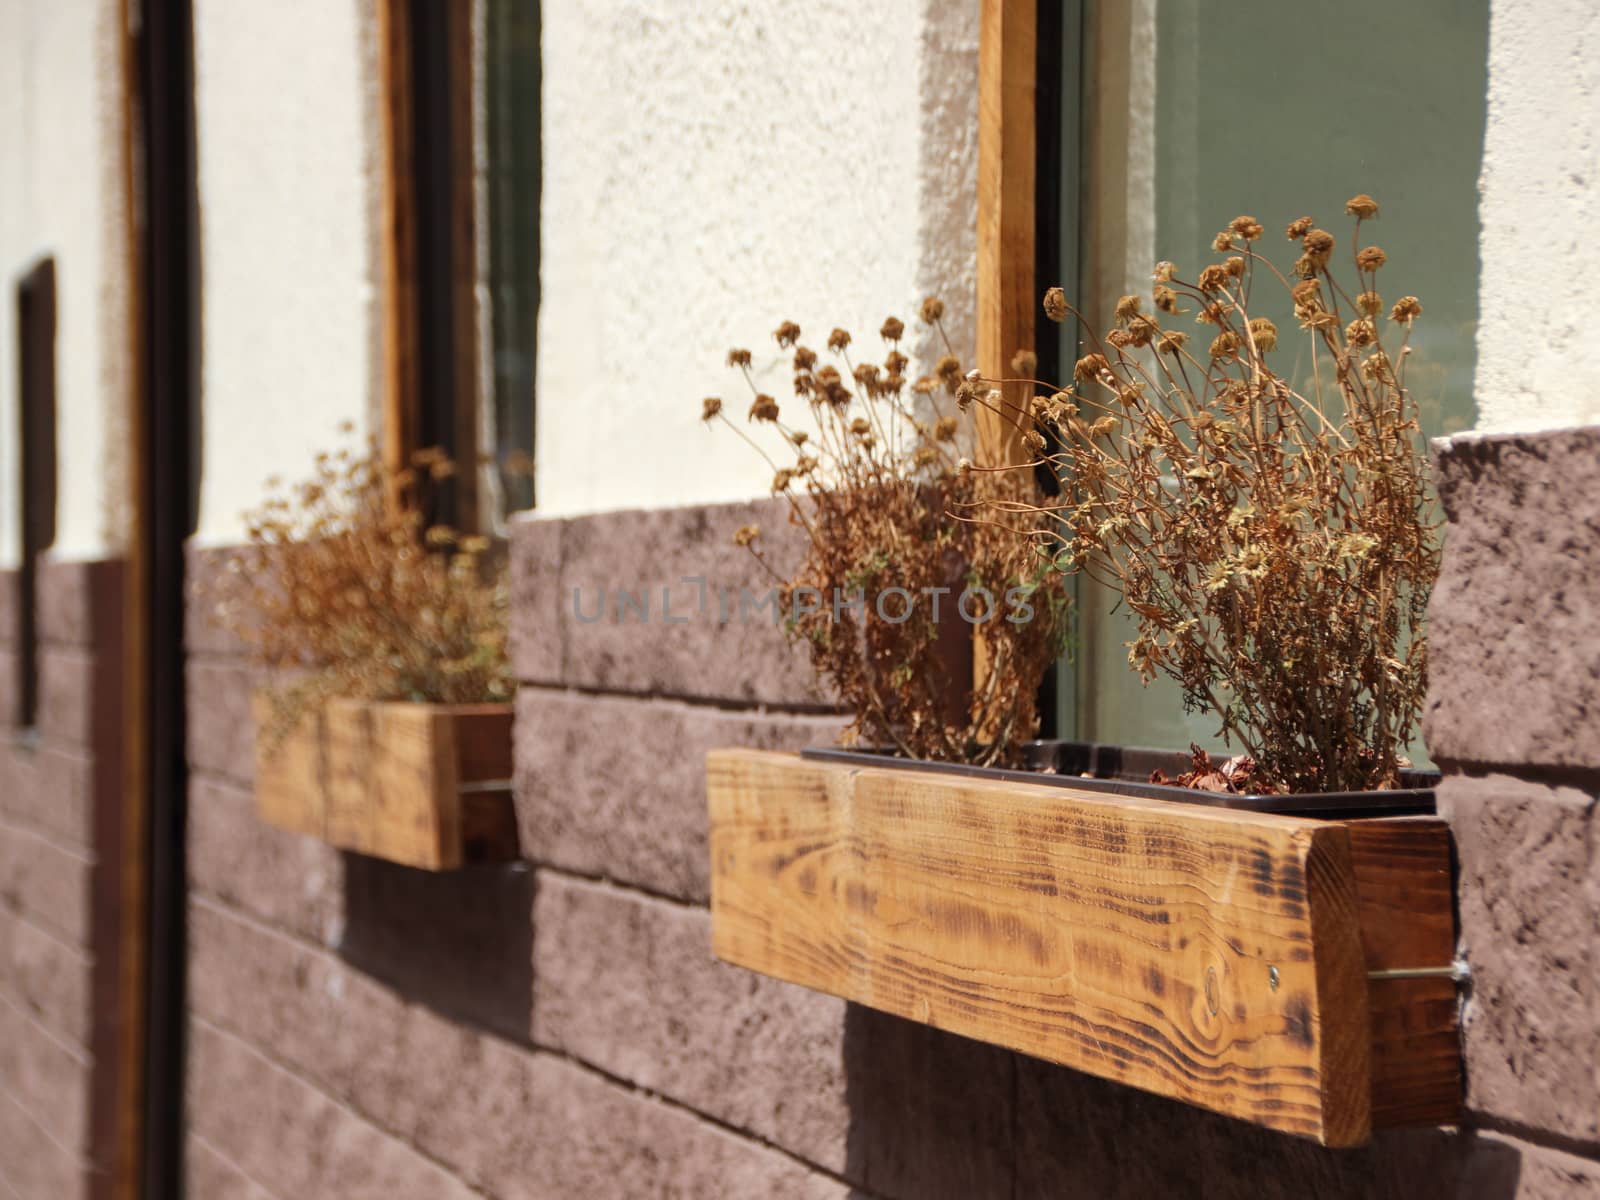 Dead Dry Withered Flowers in Wooden Window Box on Wall